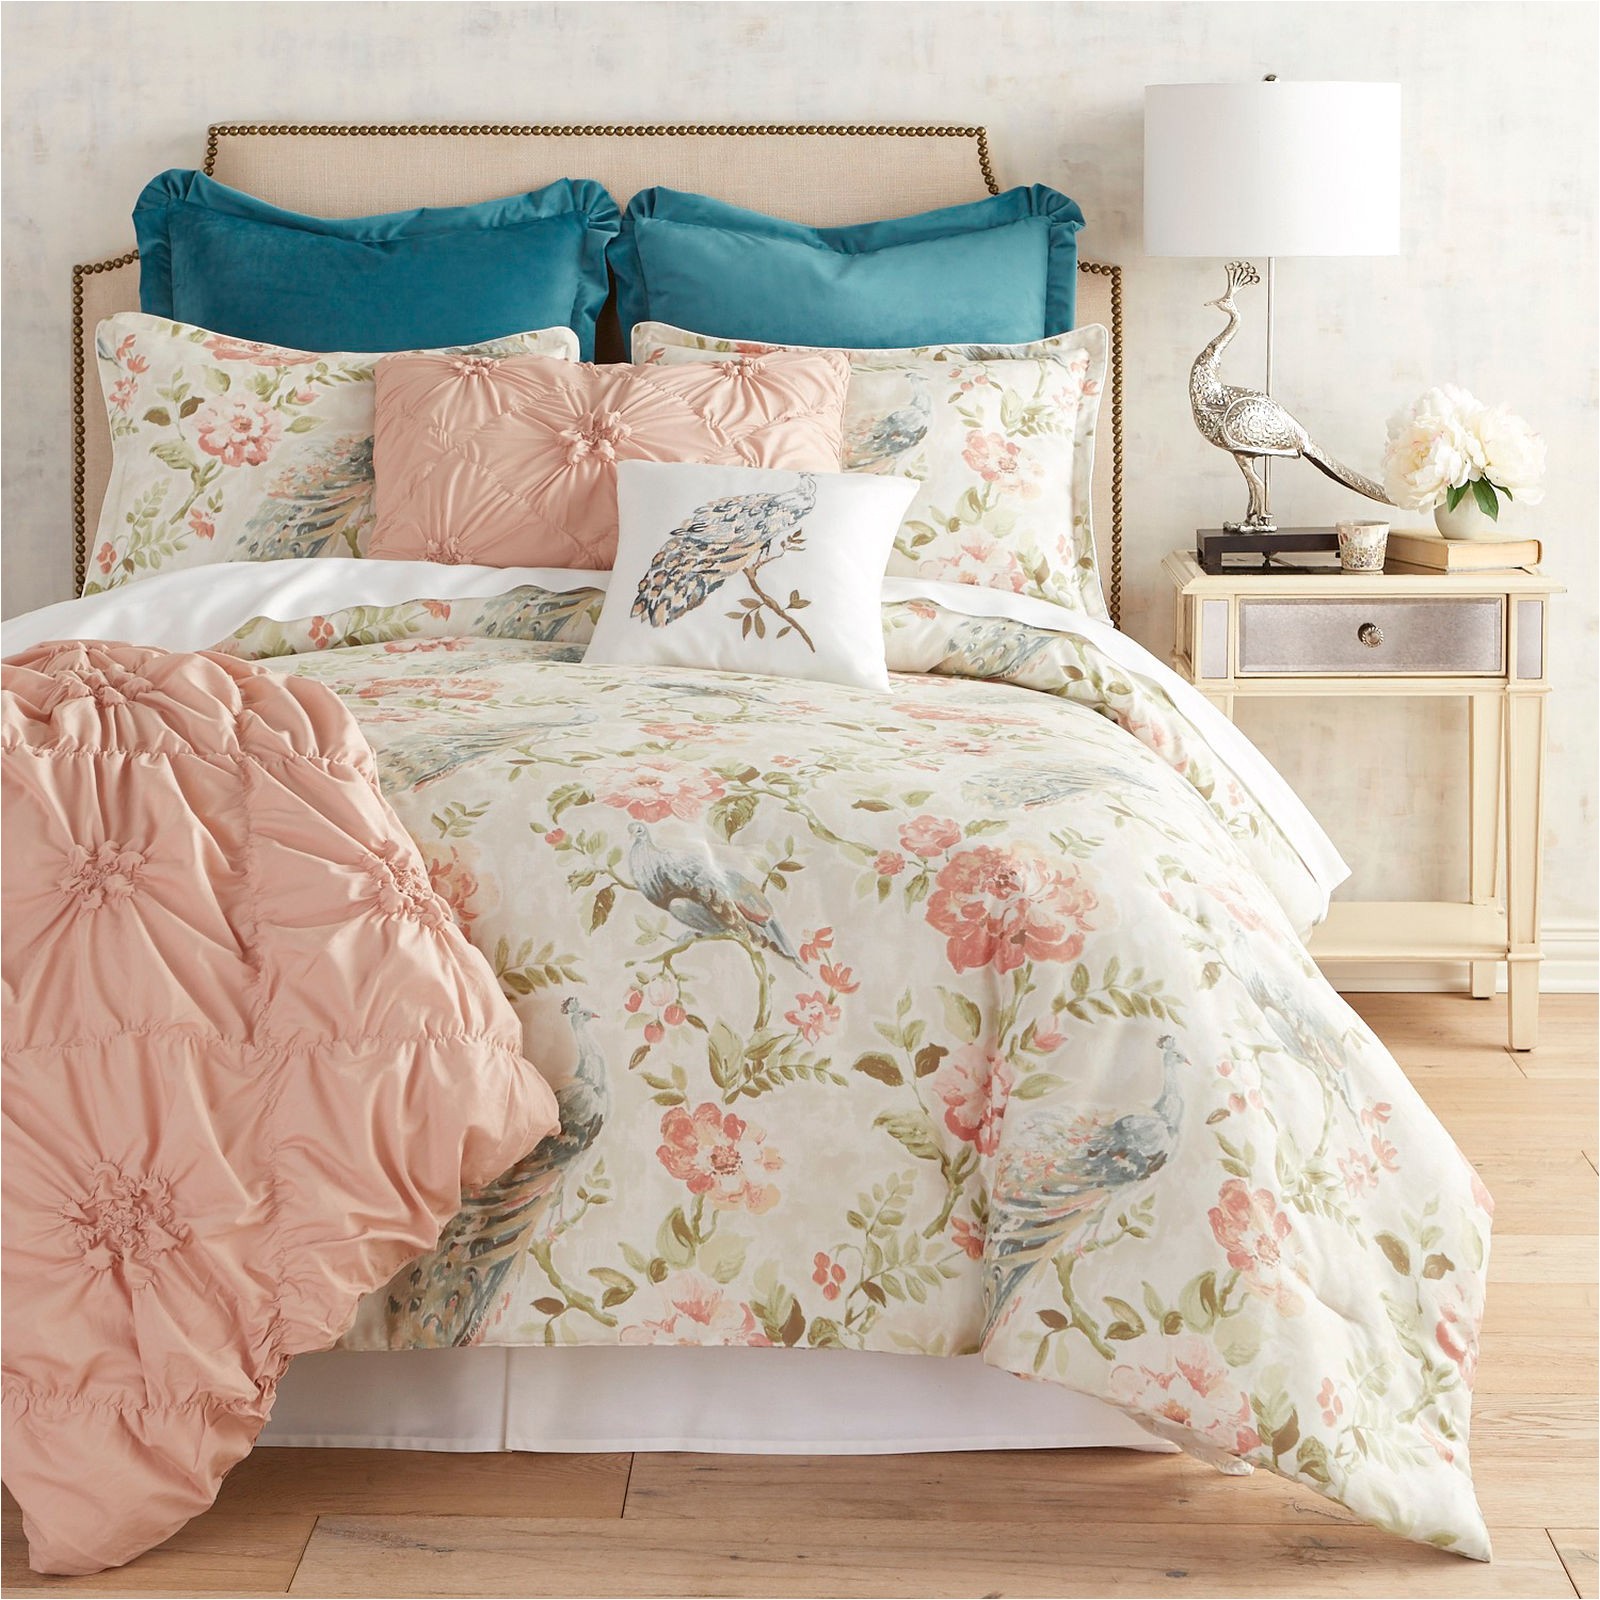 choosing the best comforter shopping guide opinions and analysis in 2018 2019